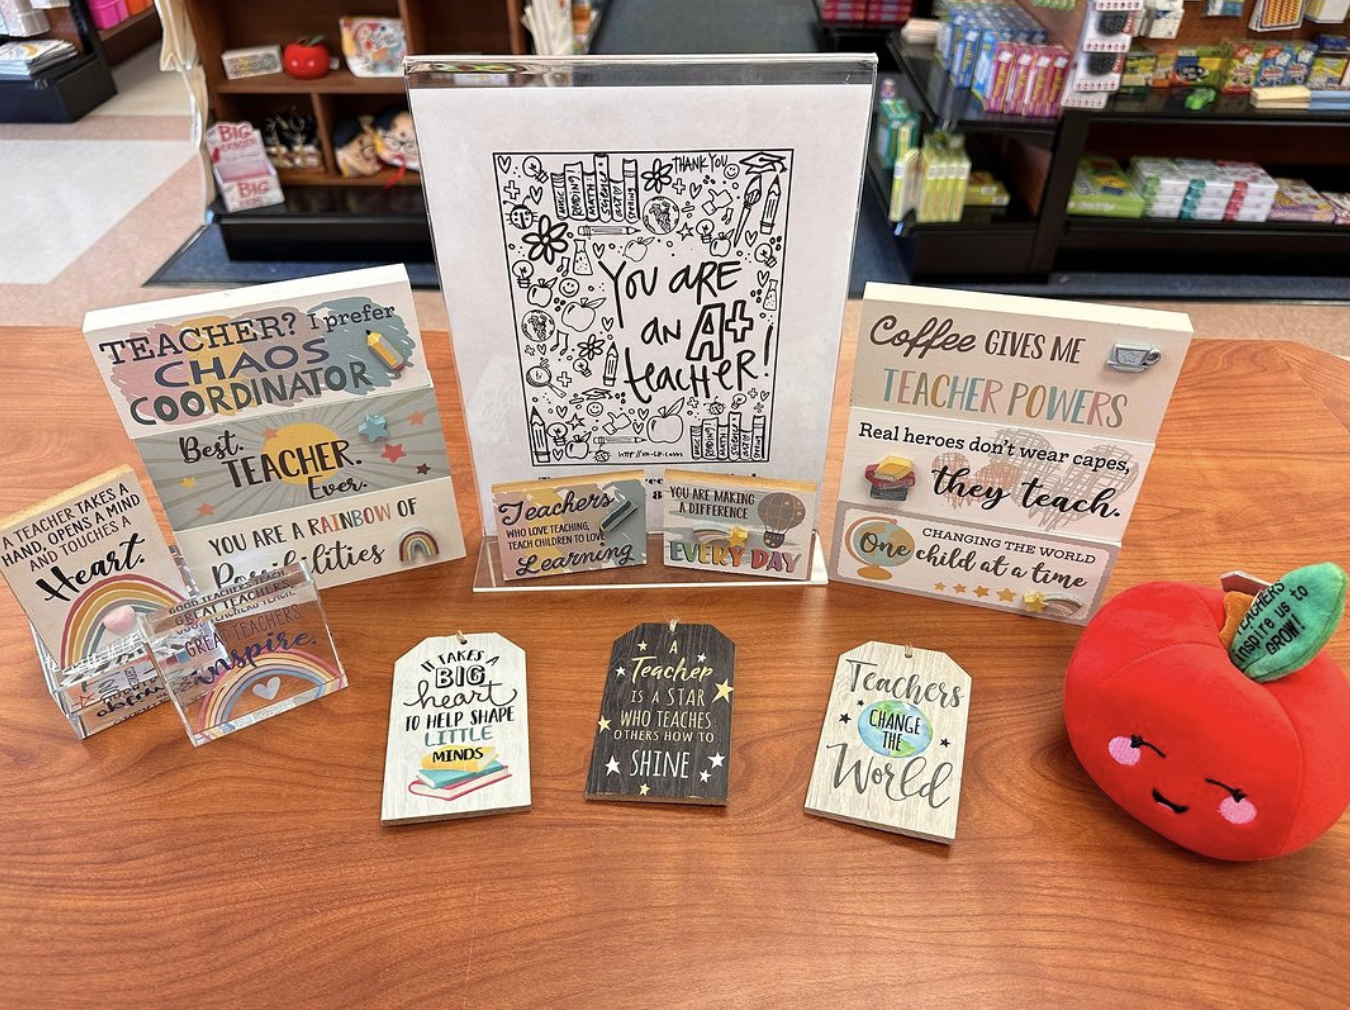 A selection of coloring books and other items on a table for teacher appreciation.